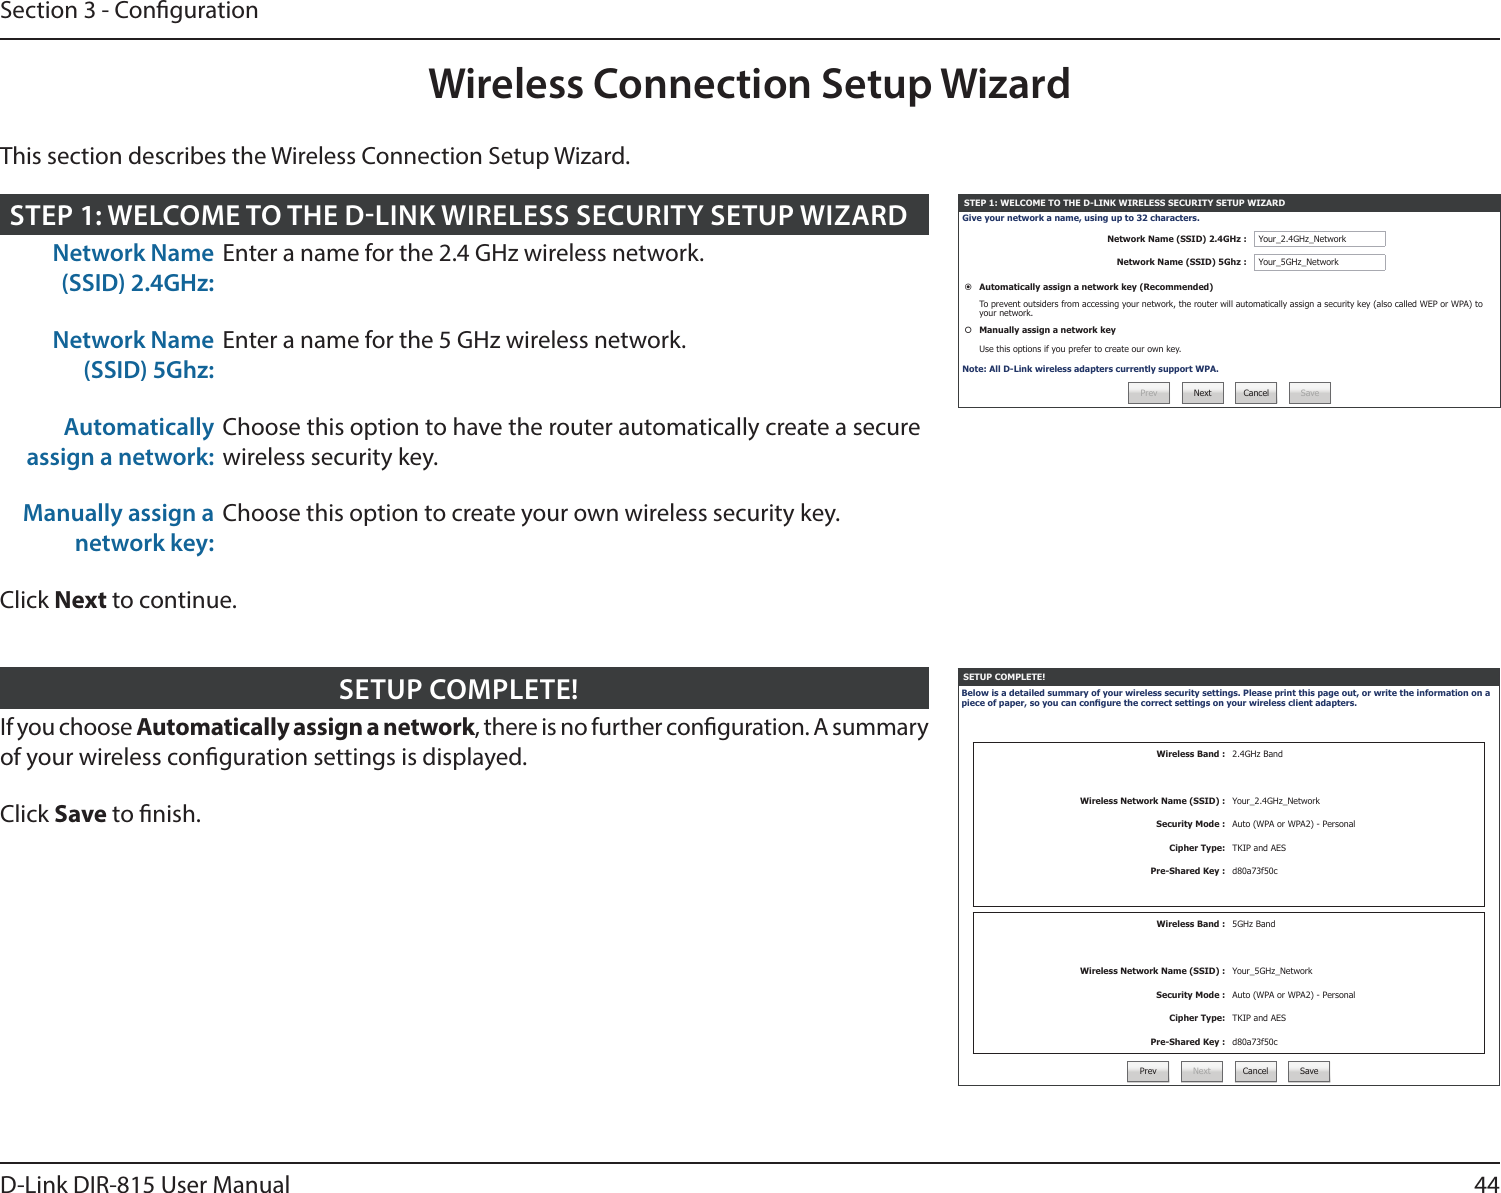 44D-Link DIR-815 User ManualSection 3 - CongurationWireless Connection Setup WizardSETUP COMPLETE!Below is a detailed summary of your wireless security settings. Please print this page out, or write the information on a piece of paper, so you can congure the correct settings on your wireless client adapters.Wireless Band : 2.4GHz BandWireless Network Name (SSID) : Your_2.4GHz_NetworkSecurity Mode : Auto (WPA or WPA2) - PersonalCipher Type: TKIP and AESPre-Shared Key : d80a73f50cWireless Band : 5GHz BandWireless Network Name (SSID) : Your_5GHz_NetworkSecurity Mode : Auto (WPA or WPA2) - PersonalCipher Type: TKIP and AESPre-Shared Key : d80a73f50cPrev Next Cancel SaveIf you choose Automatically assign a network, there is no further conguration. A summary of your wireless conguration settings is displayed.Click Save to nish.SETUP COMPLETE!STEP 1: WELCOME TO THE D-LINK WIRELESS SECURITY SETUP WIZARDGive your network a name, using up to 32 characters.Network Name (SSID) 2.4GHz : Your_2.4GHz_NetworkNetwork Name (SSID) 5Ghz : Your_5GHz_NetworkAutomatically assign a network key (Recommended)To prevent outsiders from accessing your network, the router will automatically assign a security key (also called WEP or WPA) to your network.Manually assign a network keyUse this options if you prefer to create our own key.Note: All D-Link wireless adapters currently support WPA.Prev Next Cancel SaveNetwork Name (SSID) 2.4GHz:Enter a name for the 2.4 GHz wireless network.Network Name (SSID) 5Ghz:Enter a name for the 5 GHz wireless network.Automatically assign a network:Choose this option to have the router automatically create a secure wireless security key.Manually assign a network key:Choose this option to create your own wireless security key.Click Next to continue.STEP 1: WELCOME TO THE DLINK WIRELESS SECURITY SETUP WIZARDThis section describes the Wireless Connection Setup Wizard.